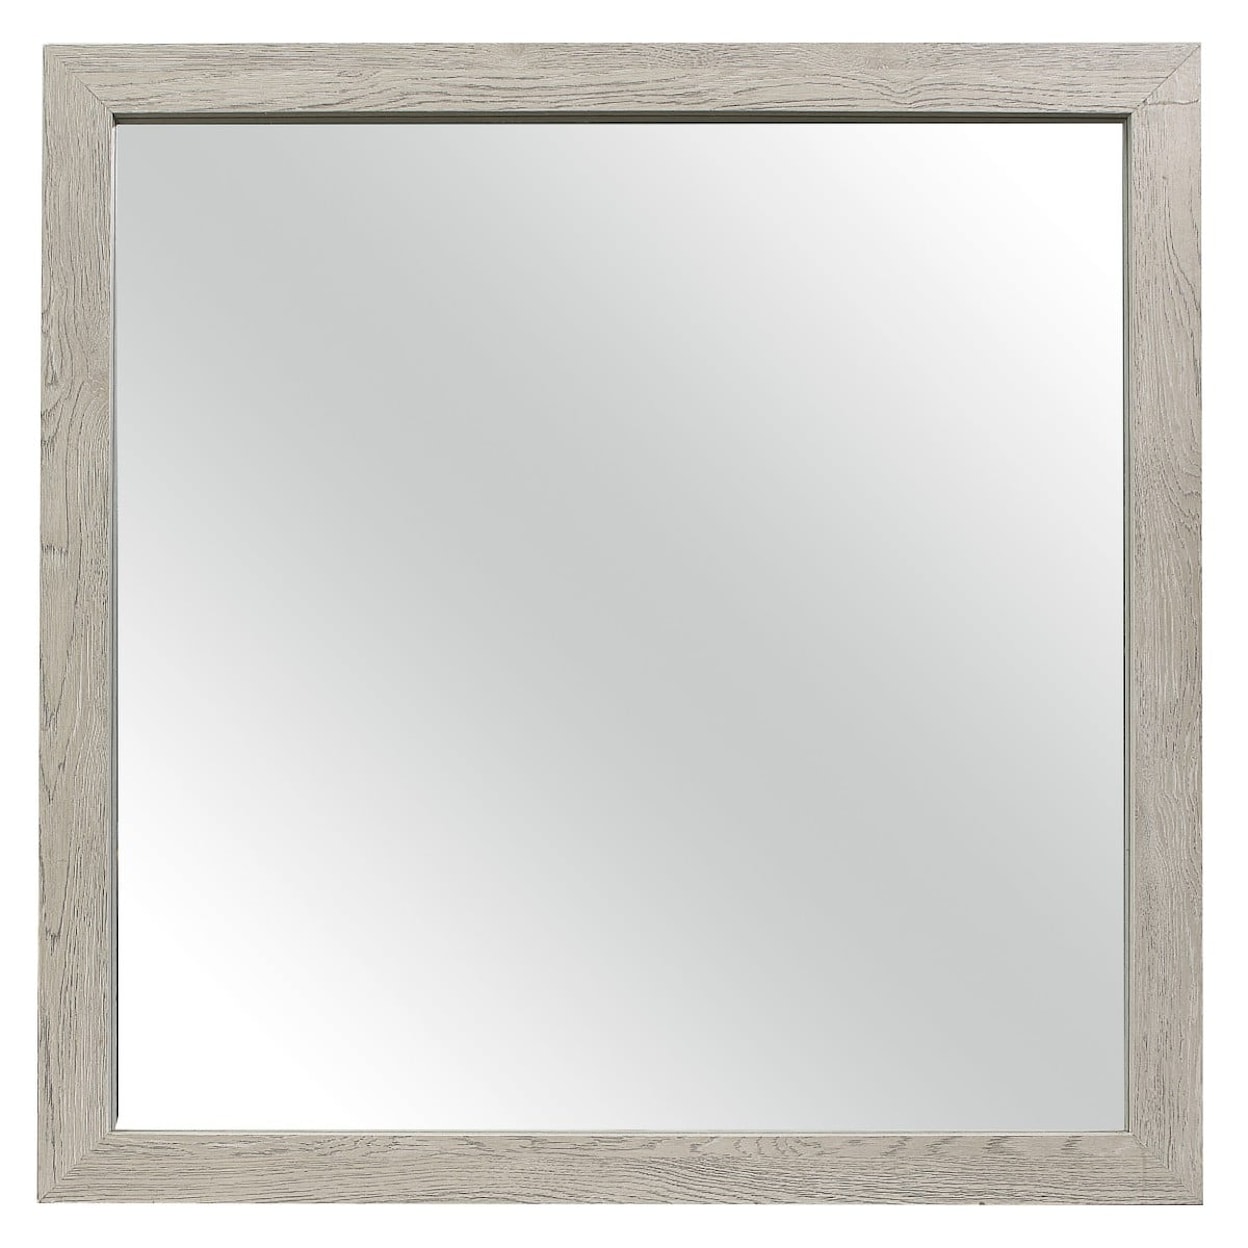 Homelegance Furniture Quinby Mirror